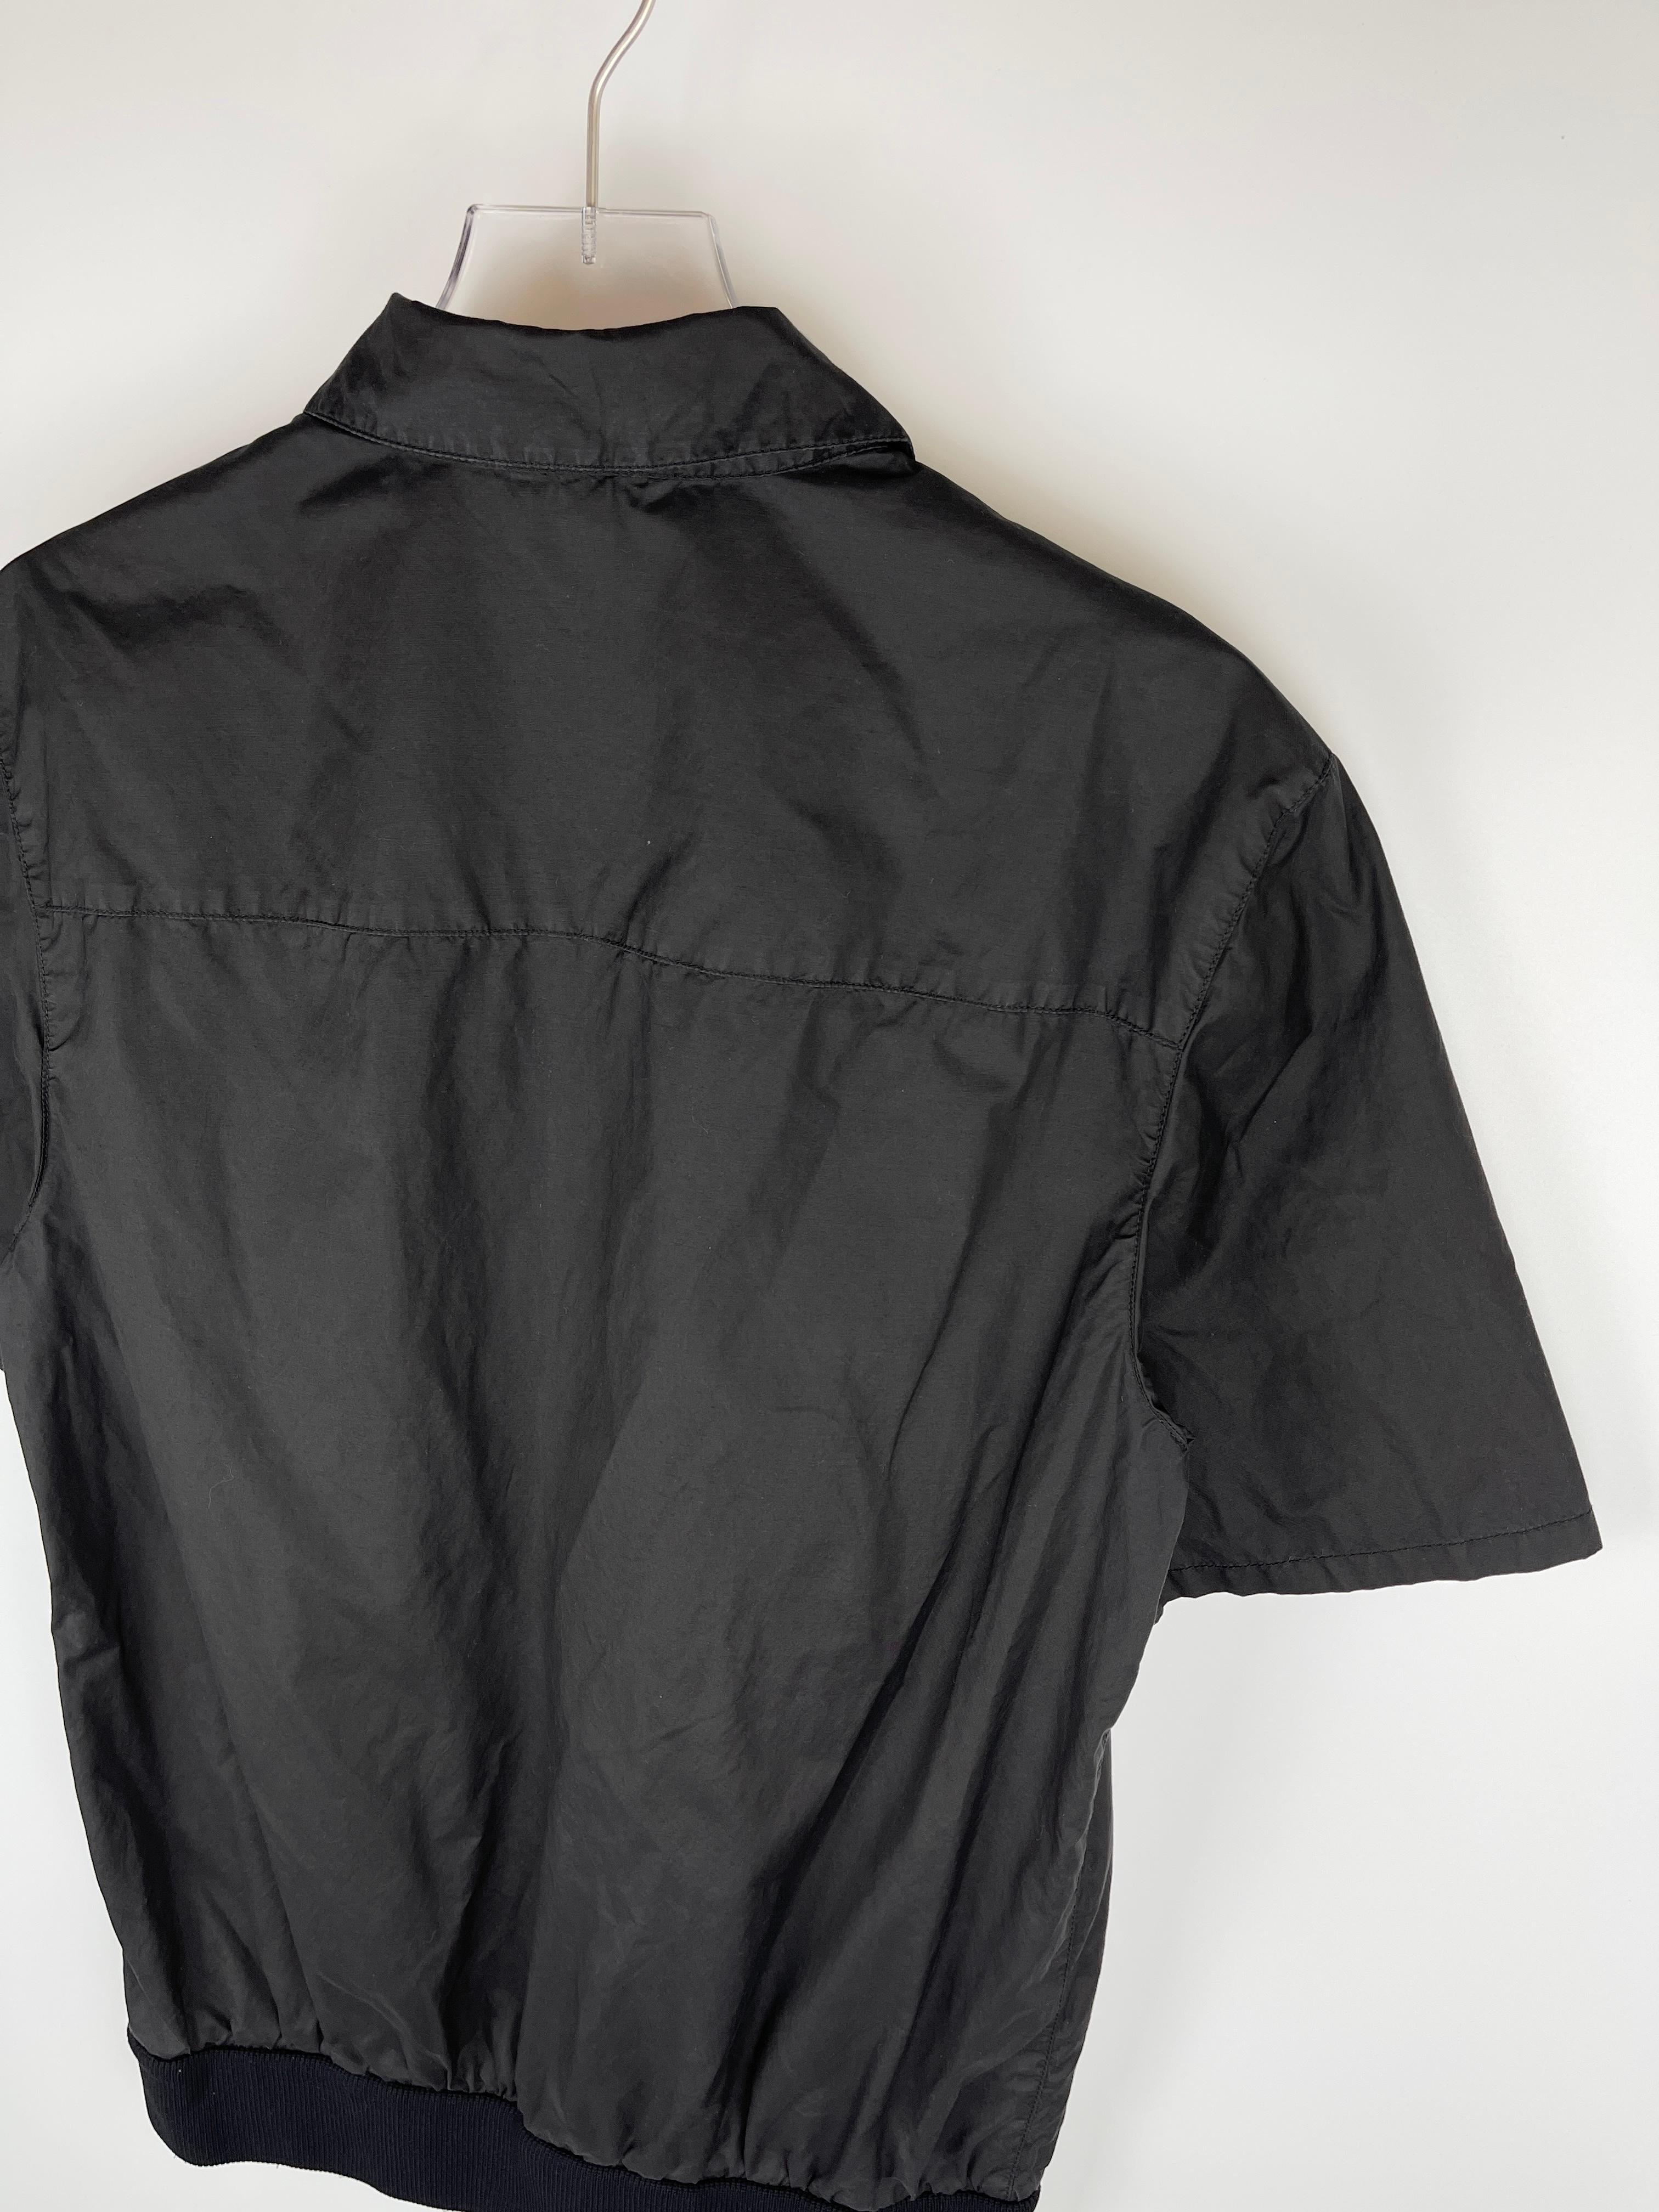 Miu Miu A/W2000 Zip-Up Military Shirt In Good Condition For Sale In Seattle, WA